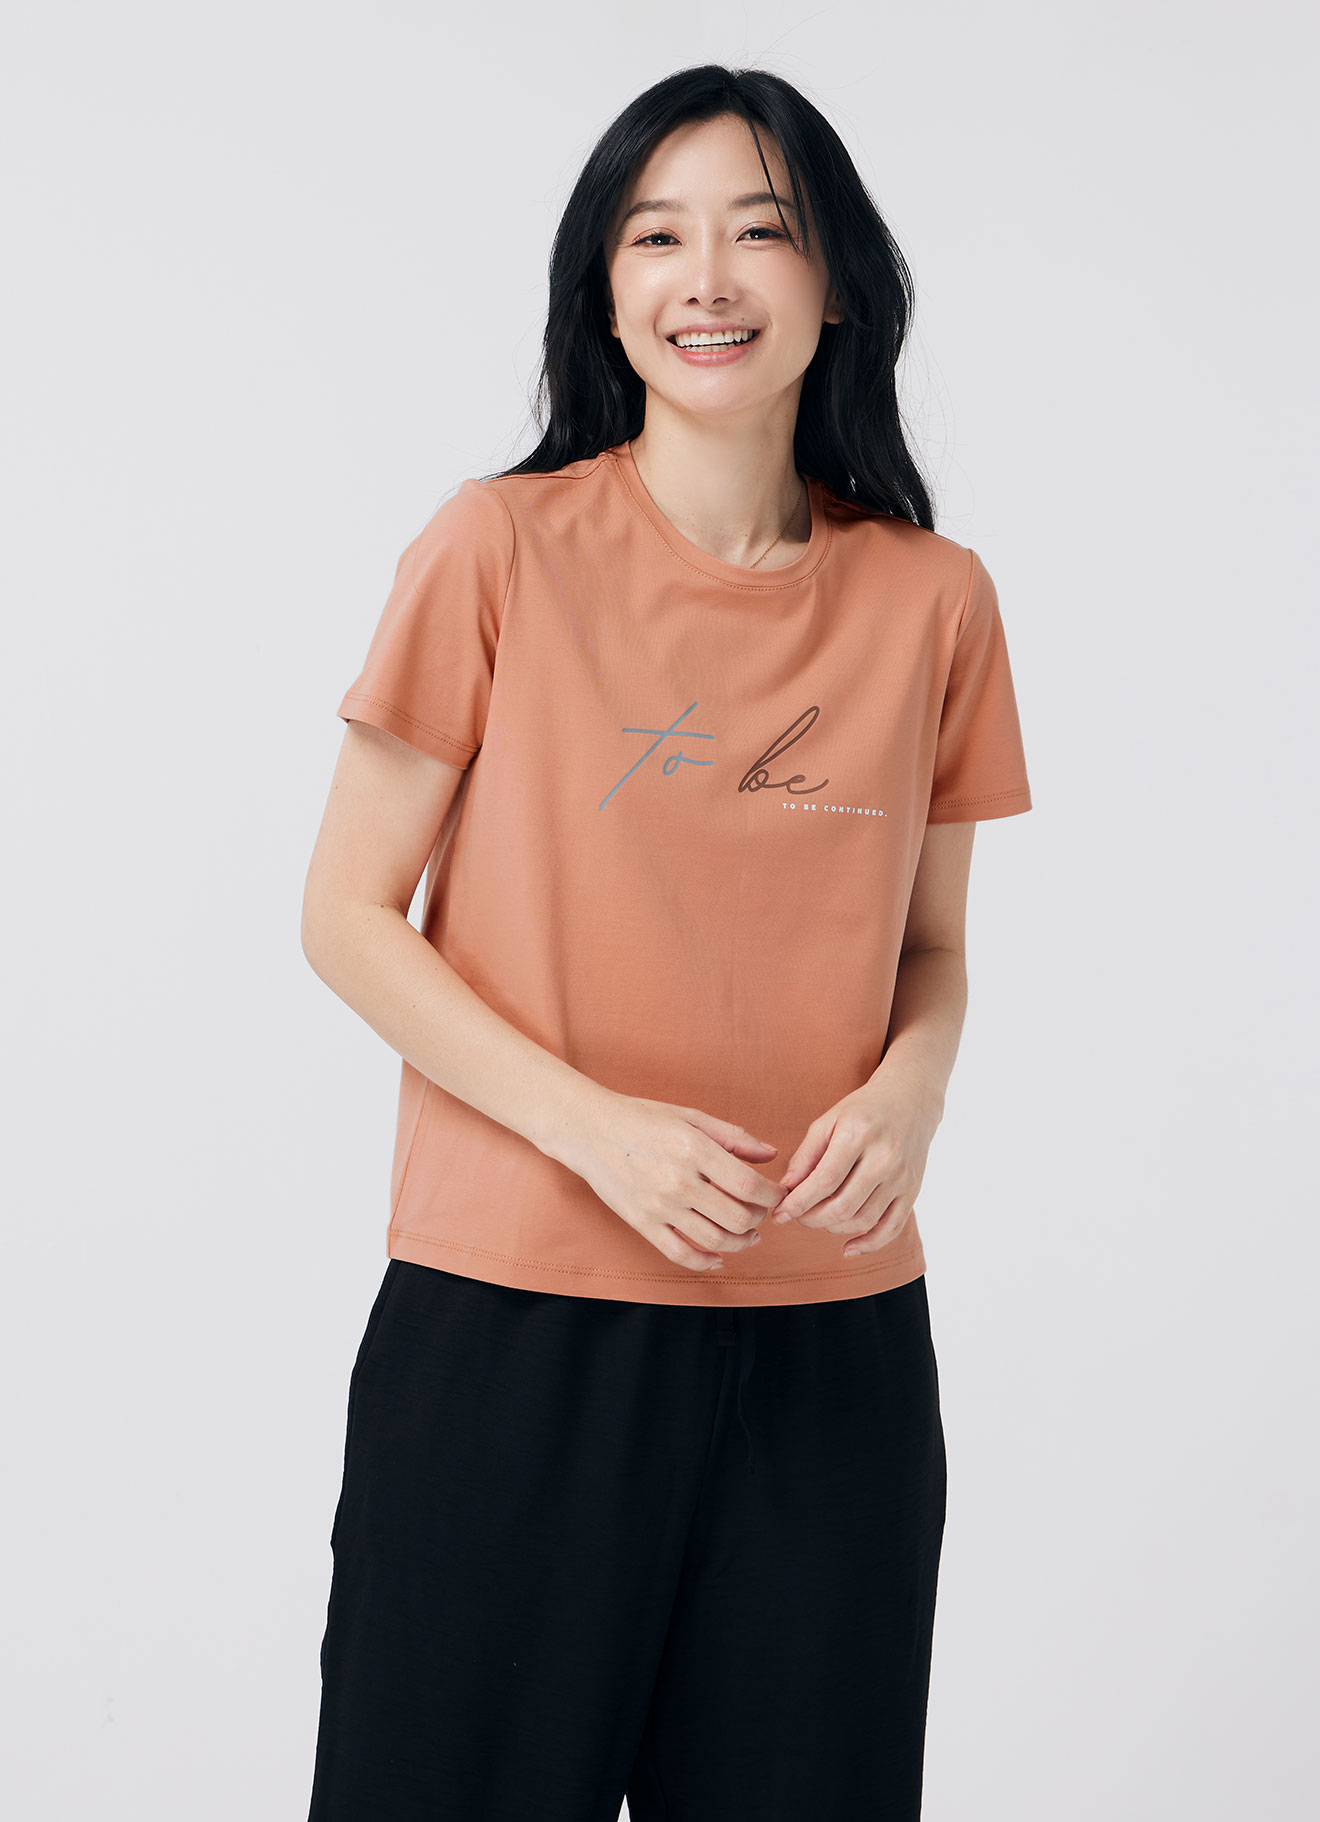 Brandied-Melon  by Printed Top